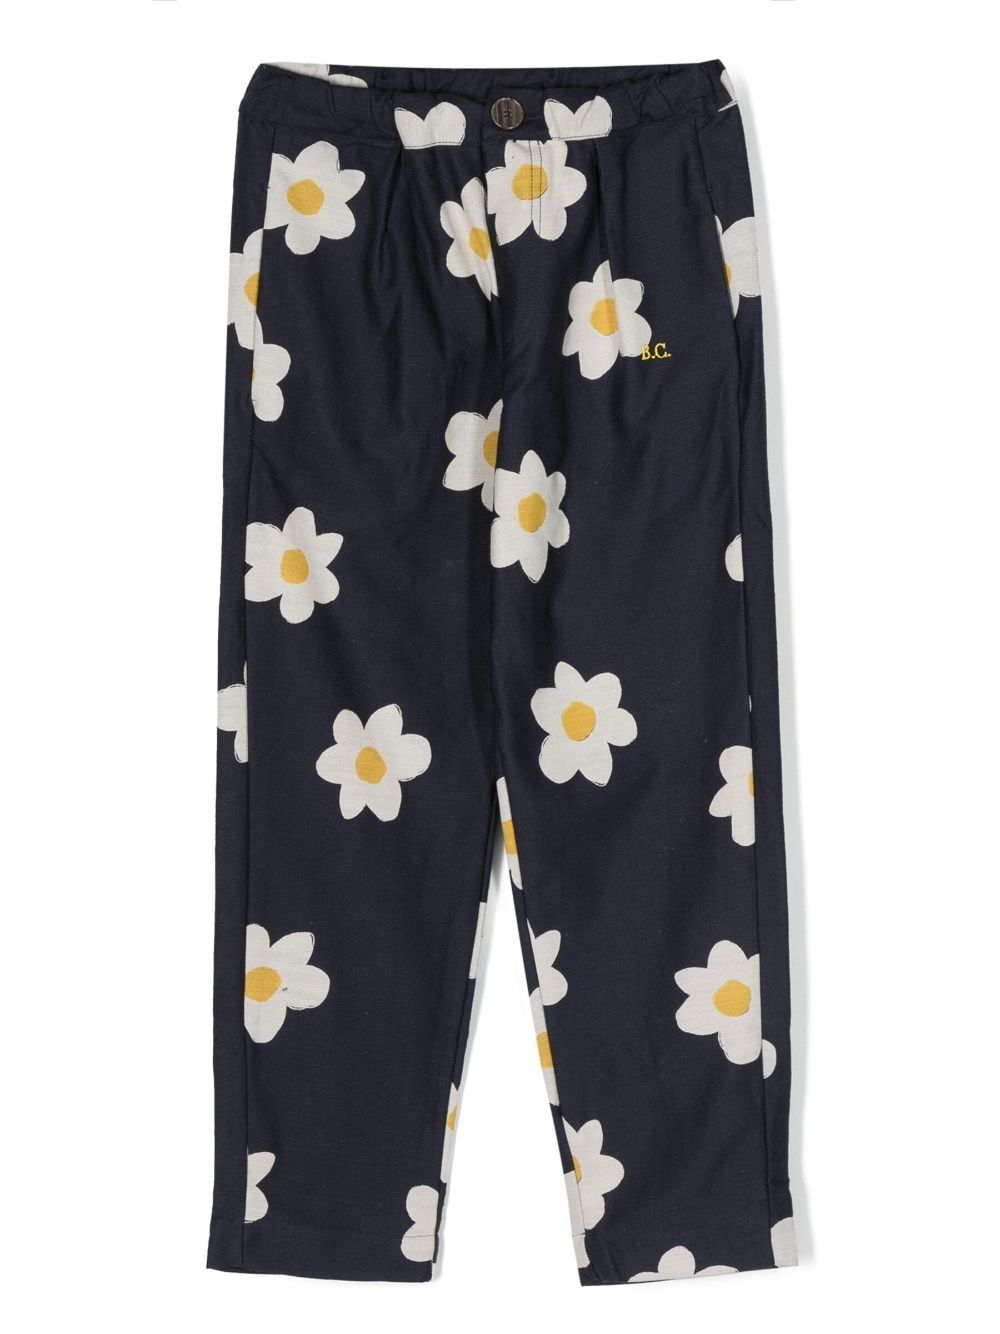 Big Flower All Over Baggy Pants In Black